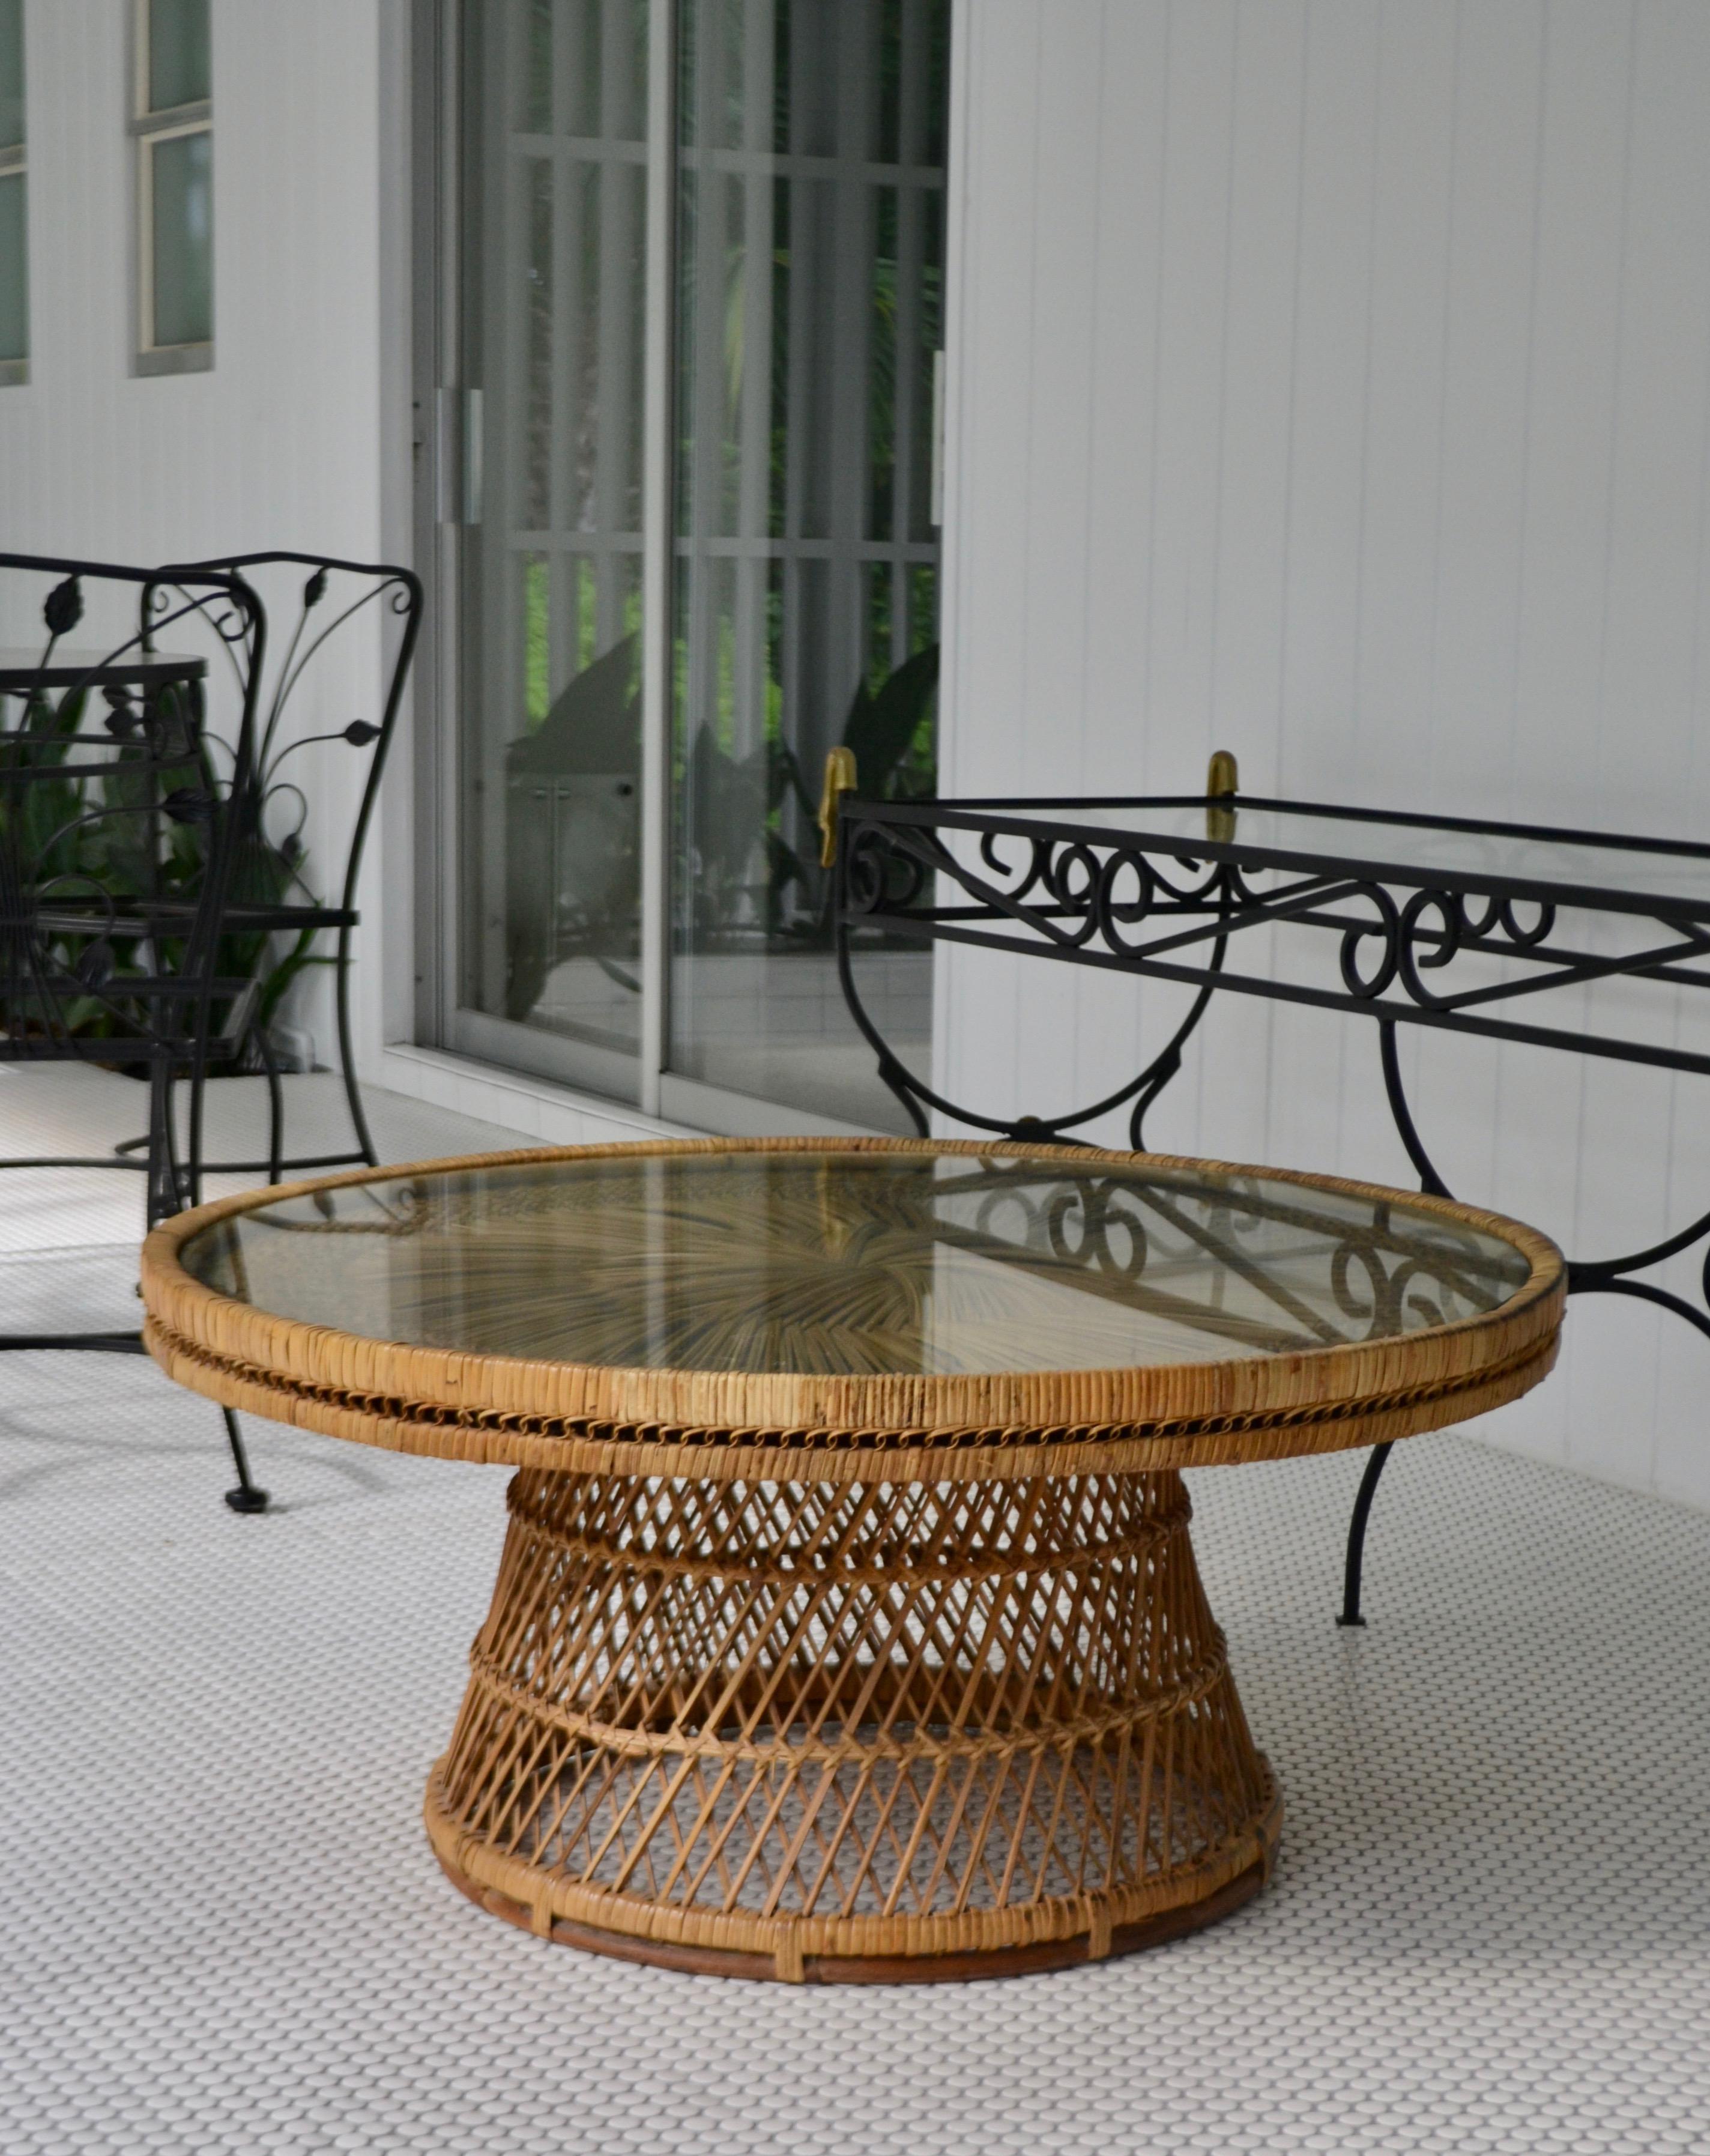 Stunning natural woven rattan round coffee table, circa 1960s. This striking midcentury cocktail table is designed of an intricately webbed woven rattan pattern over a wooden frame and outfitted with a round inset glass top.